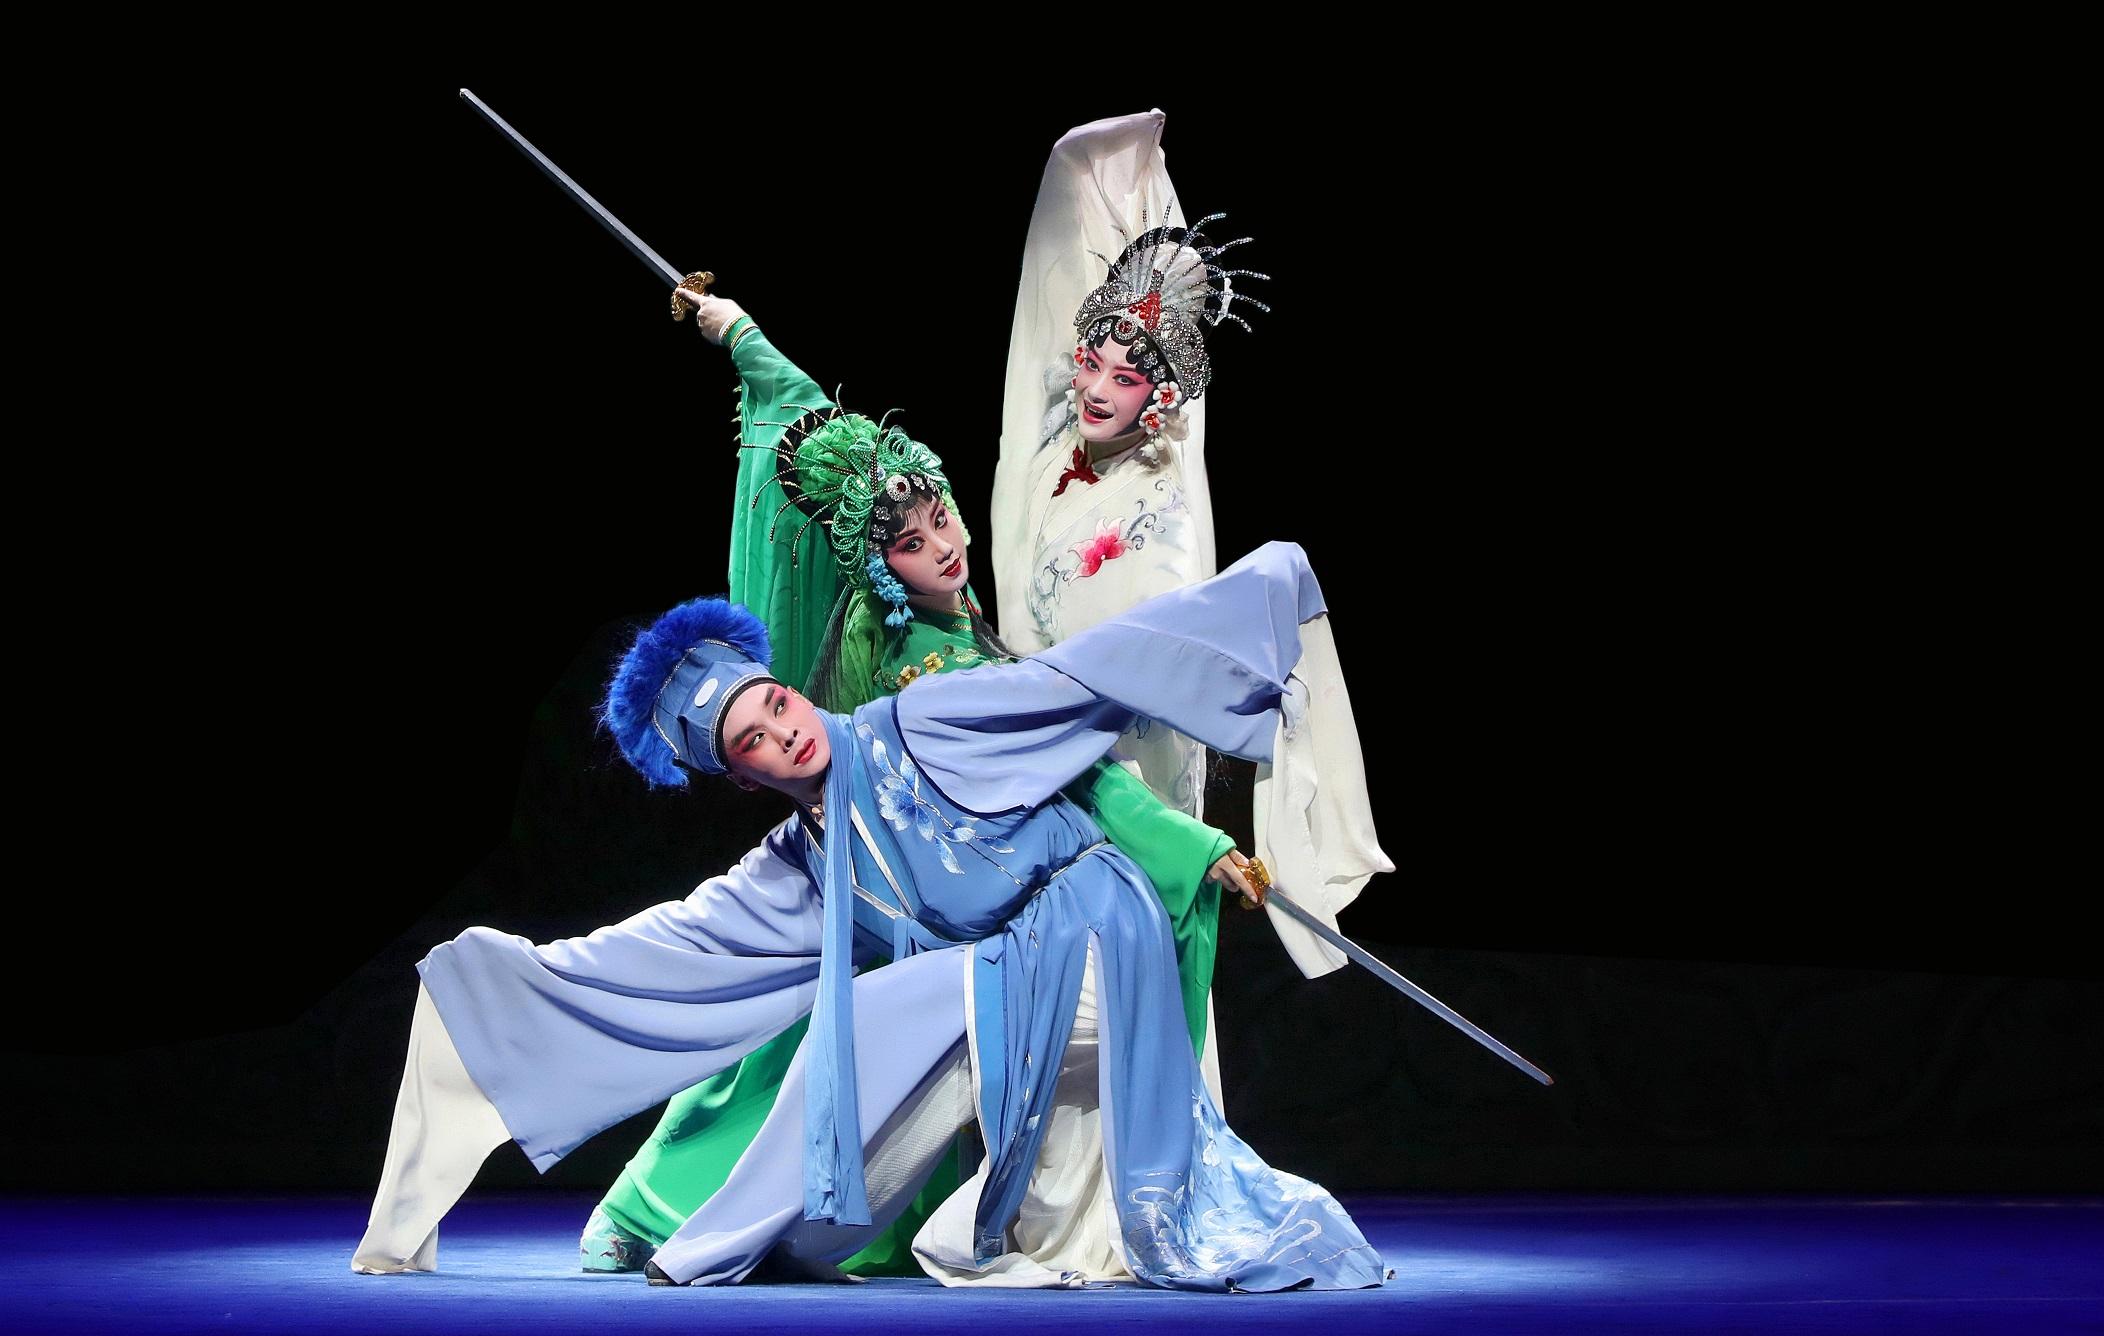 The Chinese Opera Festival, presented by the Leisure and Cultural Services Department, will stage quality operatic programmes from June to October. Photo shows a performance scene of "The Legend of the White Snake" by the Zhejiang Wu Opera Research Centre.